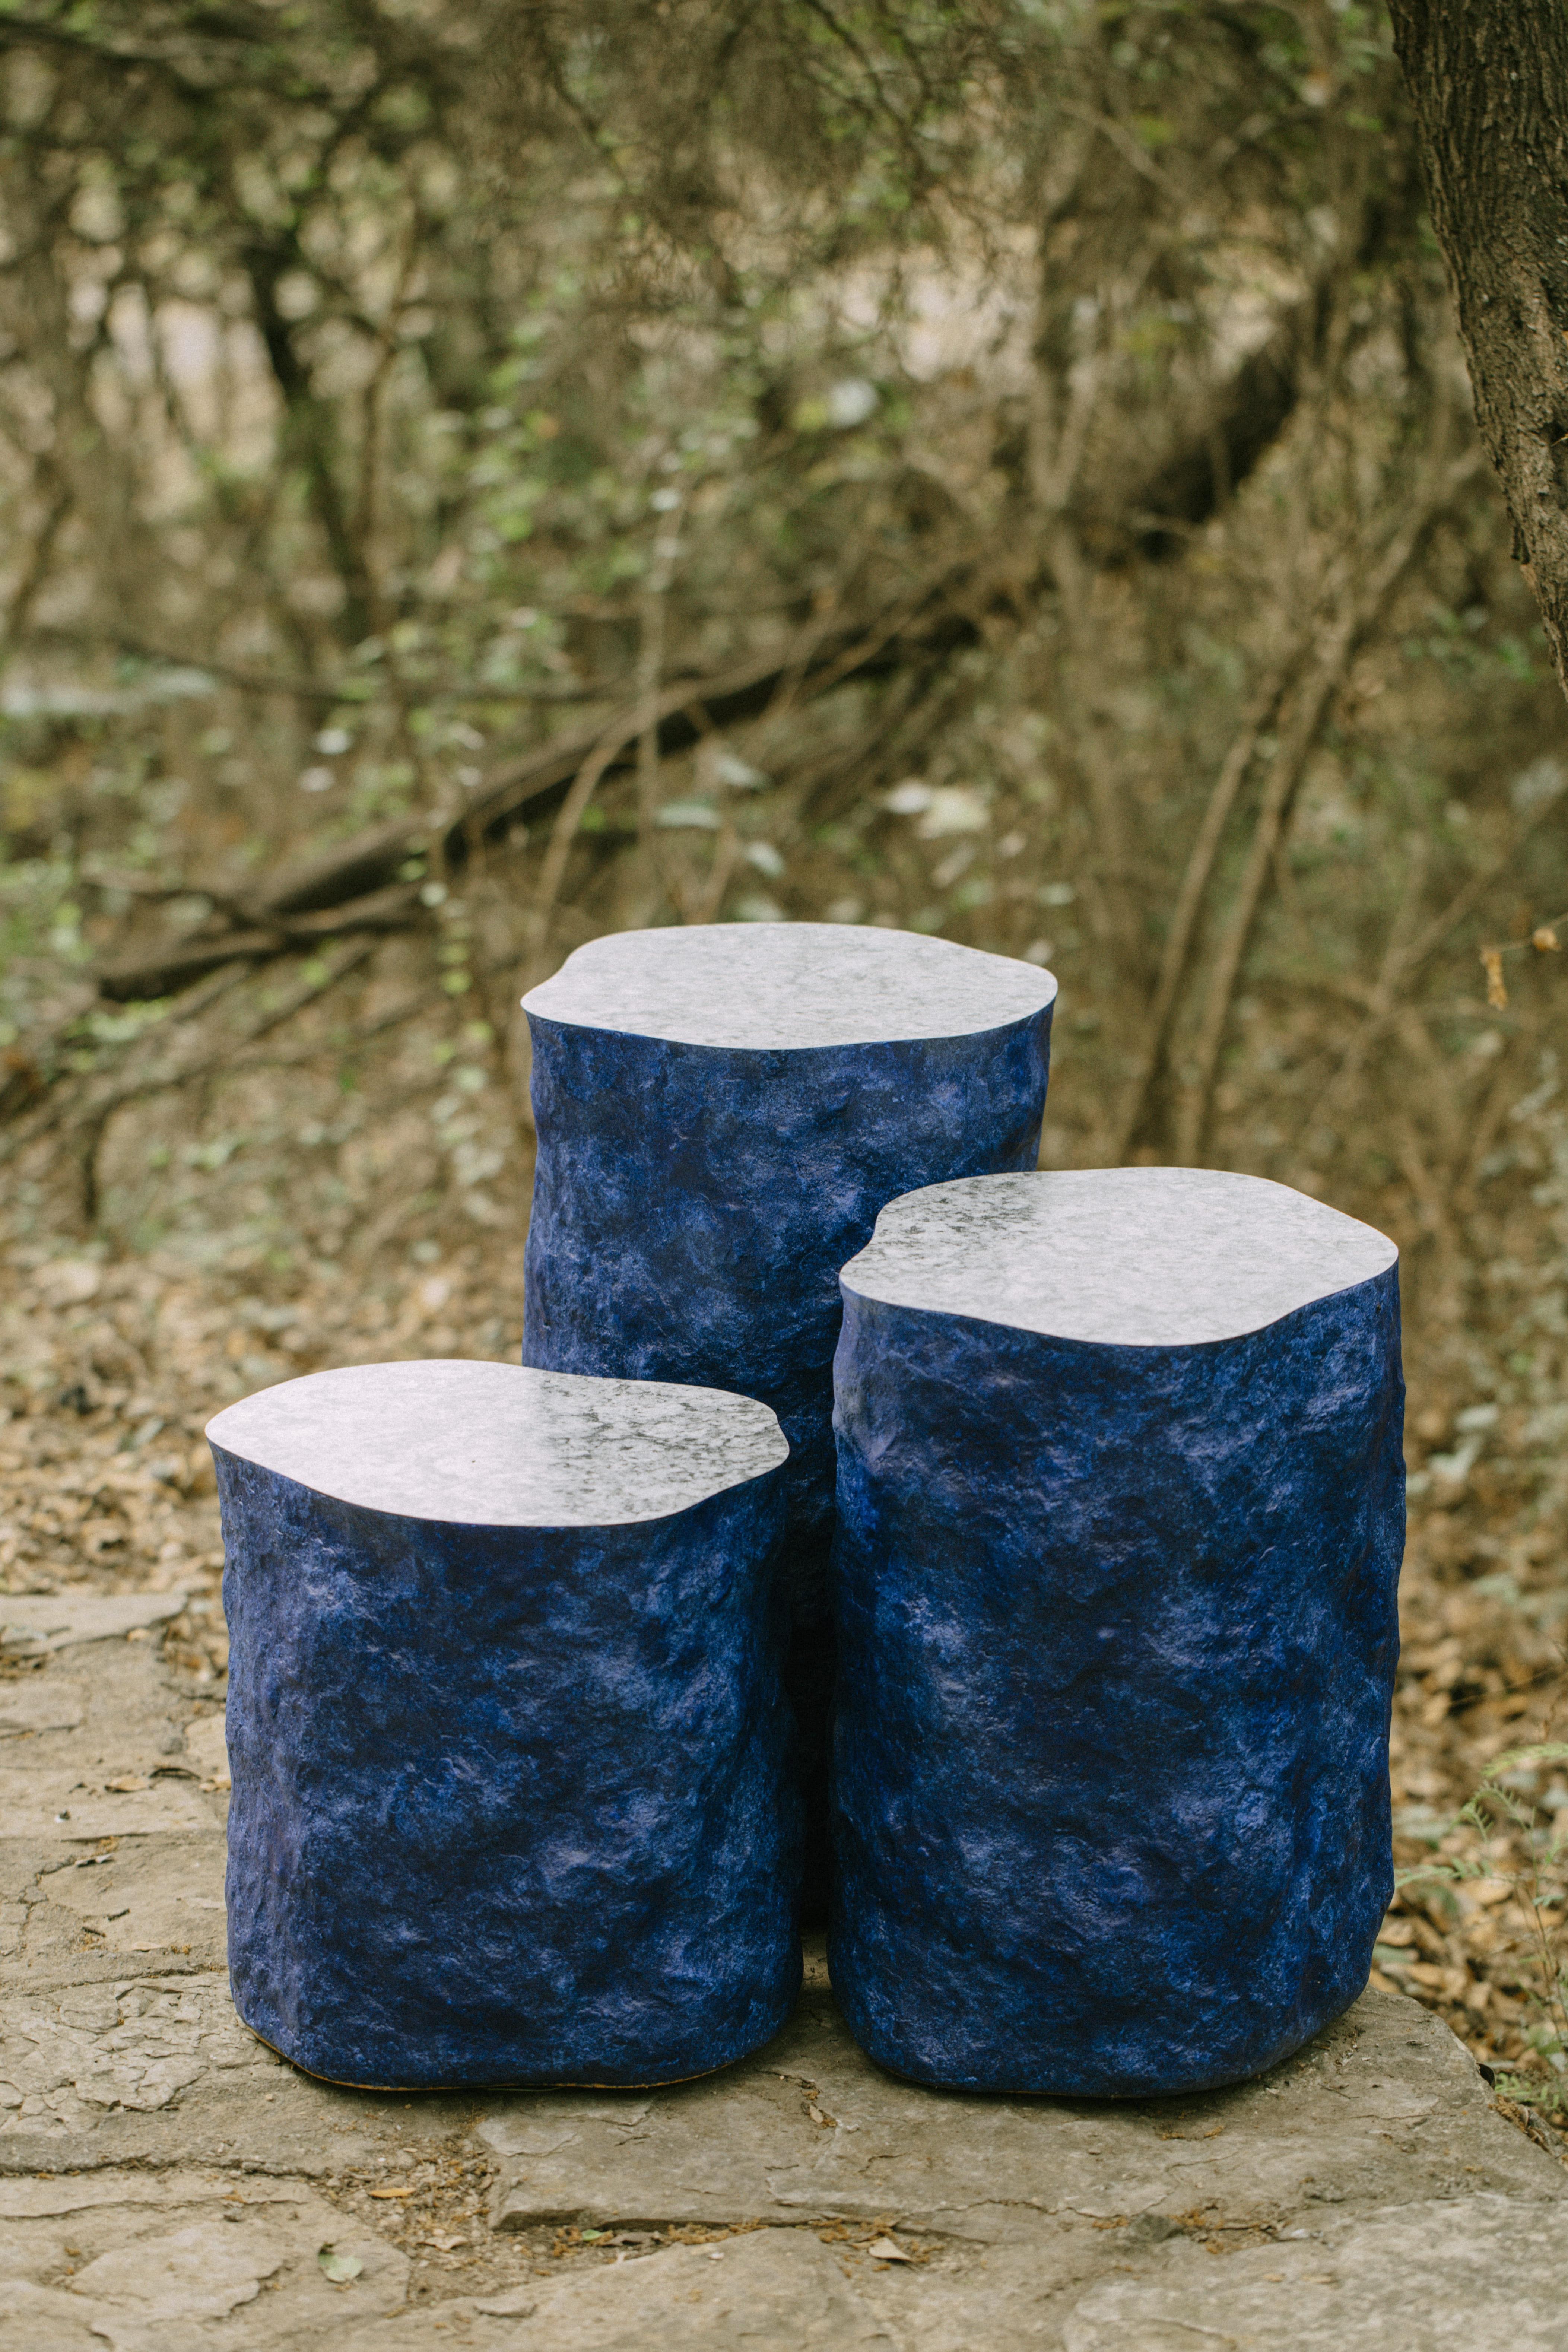 Set of 3 Piedra pedestals by Algo Studio
Designed by Diego Garza
Dimensions:  D 31 x W 33 x  H 56 cm / D 37 x W 30 x  H 48 cm / D 30 x W 35 x  H 35 cm 
Materials: Formica, paper paste coating, plywood structure.

These side tables are a